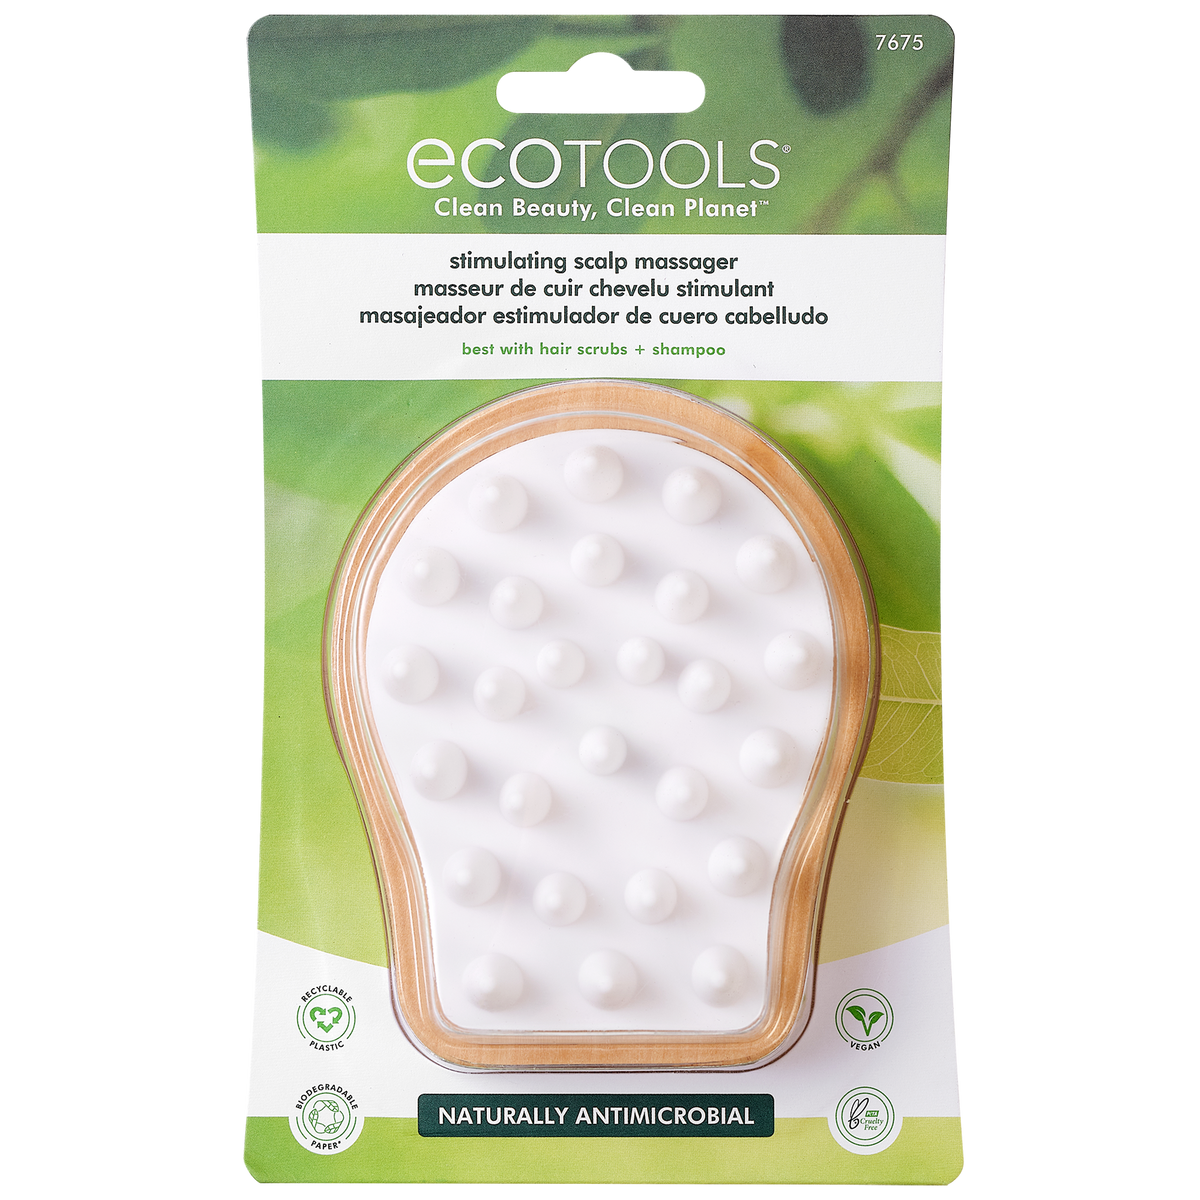 Eco Tools Stimulating Shower Scalp Massager, Promotes Health Hair Growth